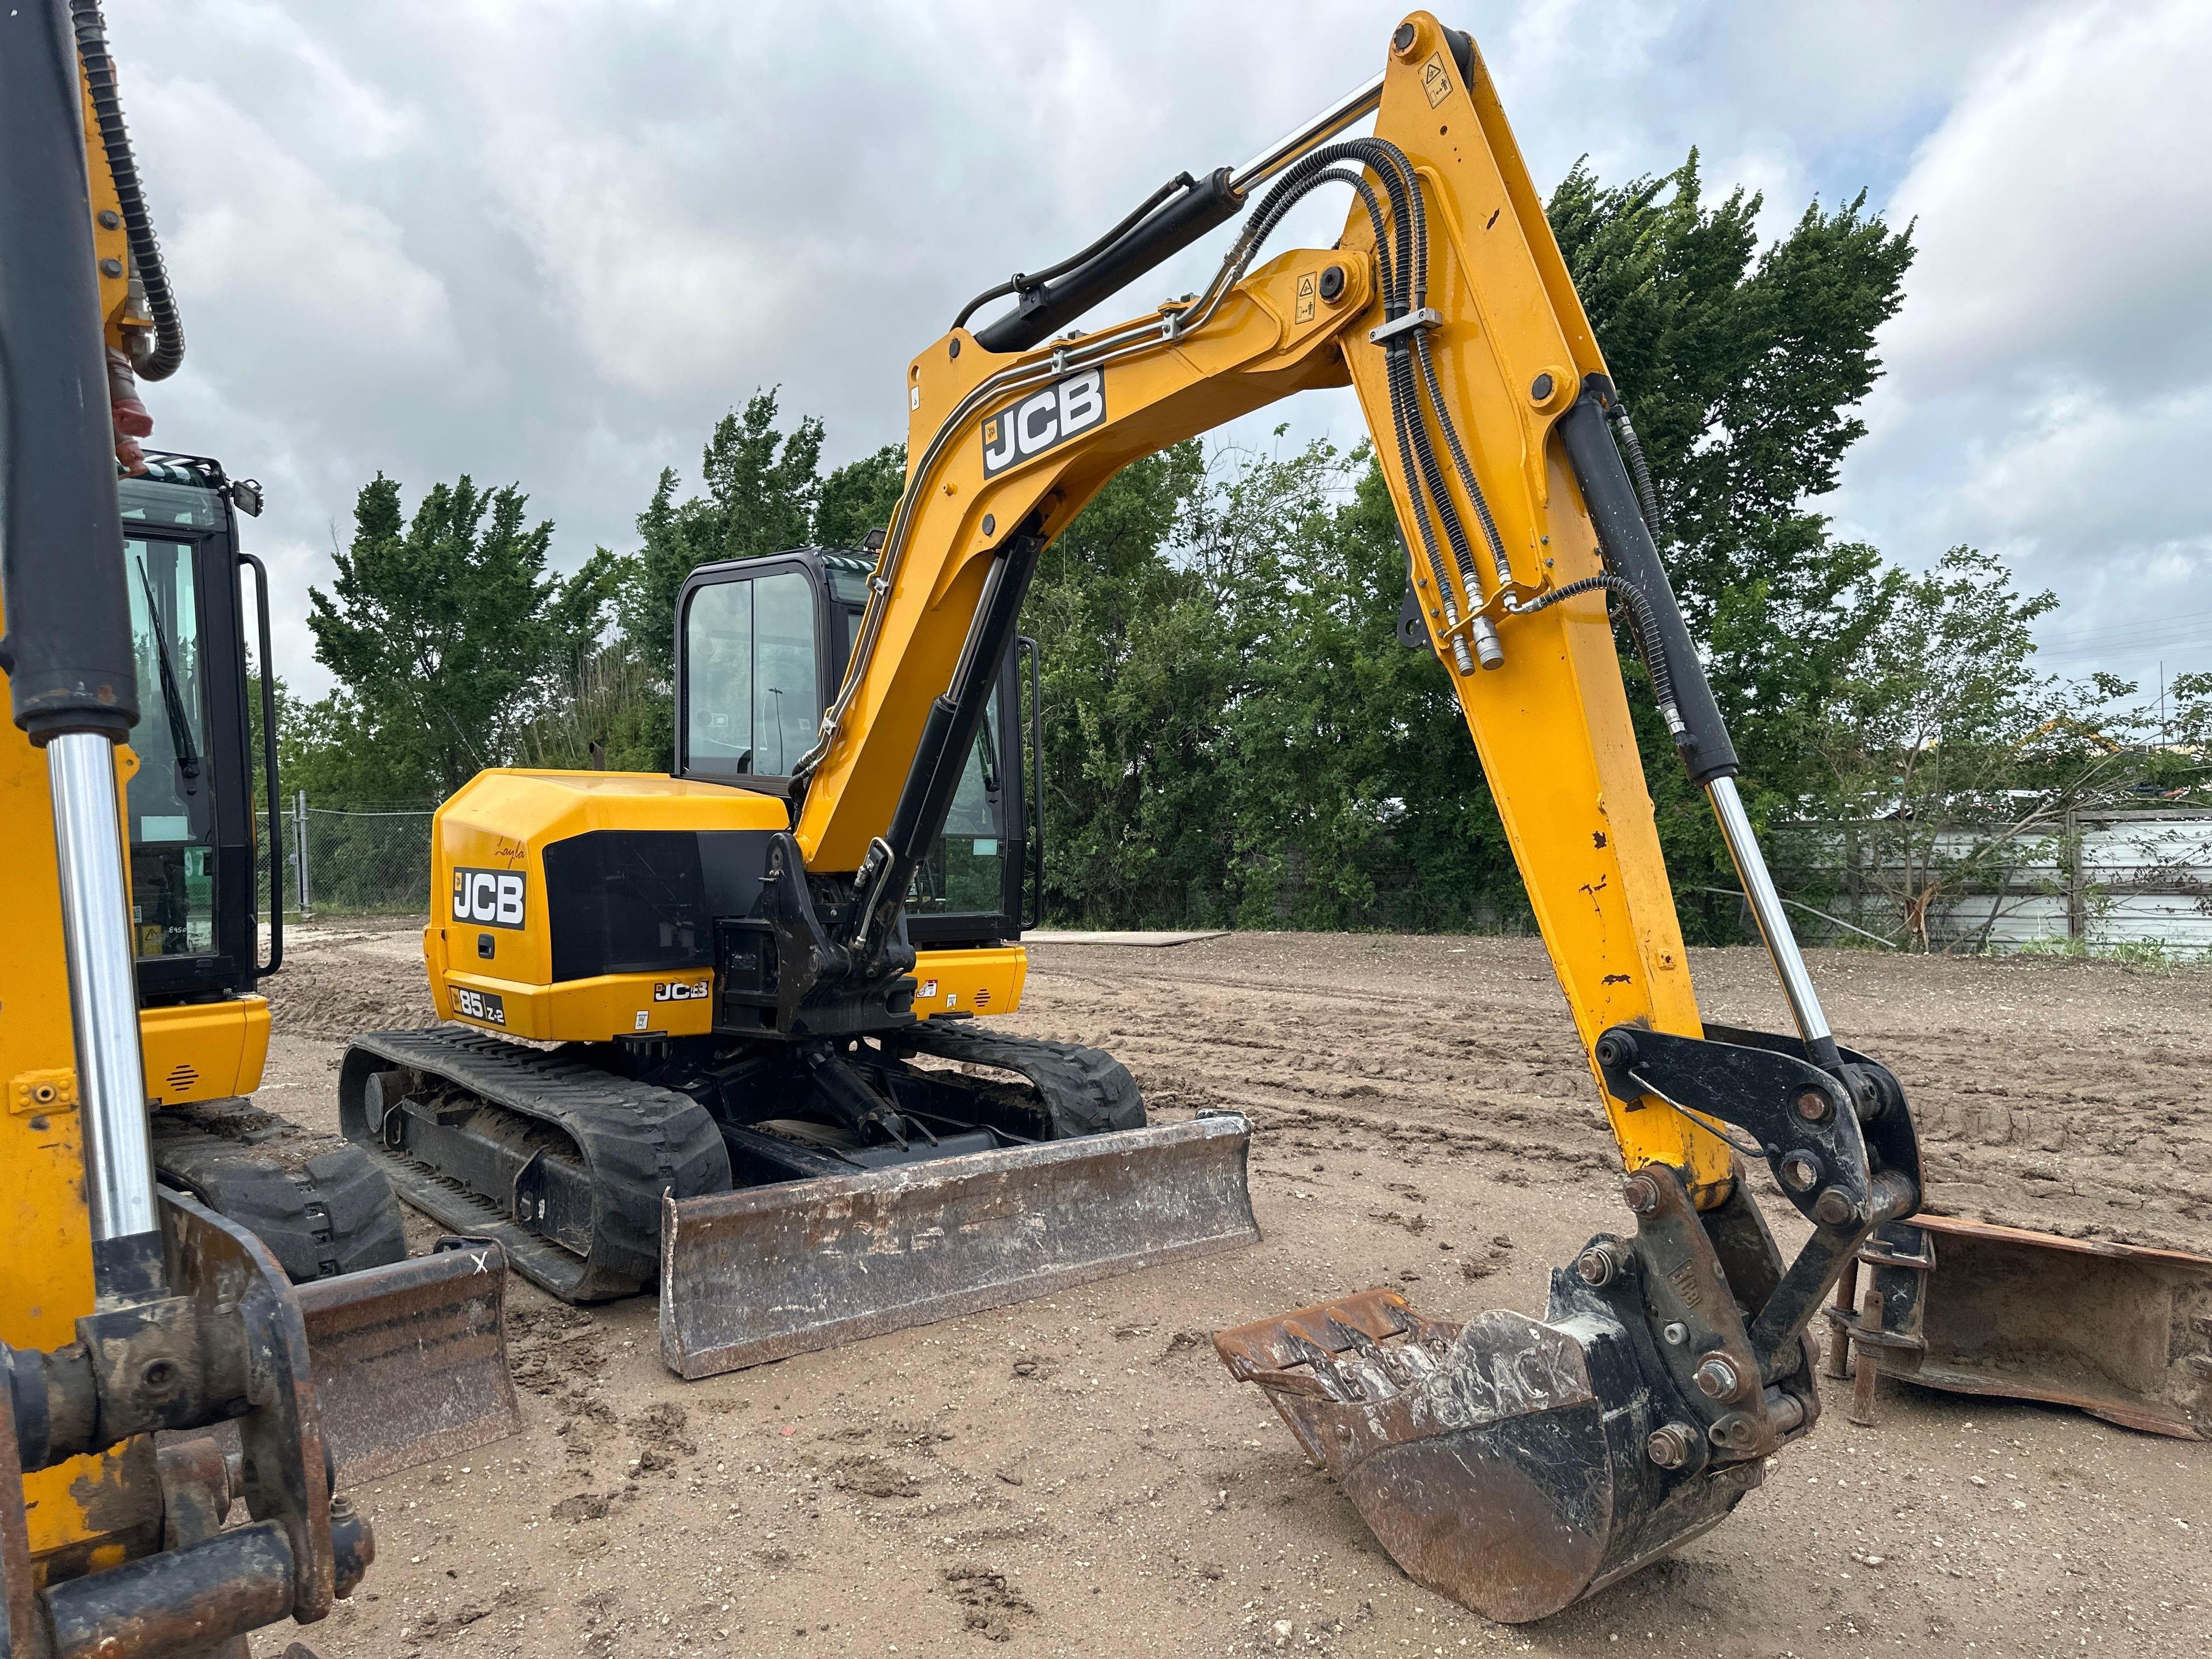 2022 JCB 85Z-2 HYDRAULIC EXCAVATOR powered by Kohler diesel engine, equipped with Cab, air, heat,